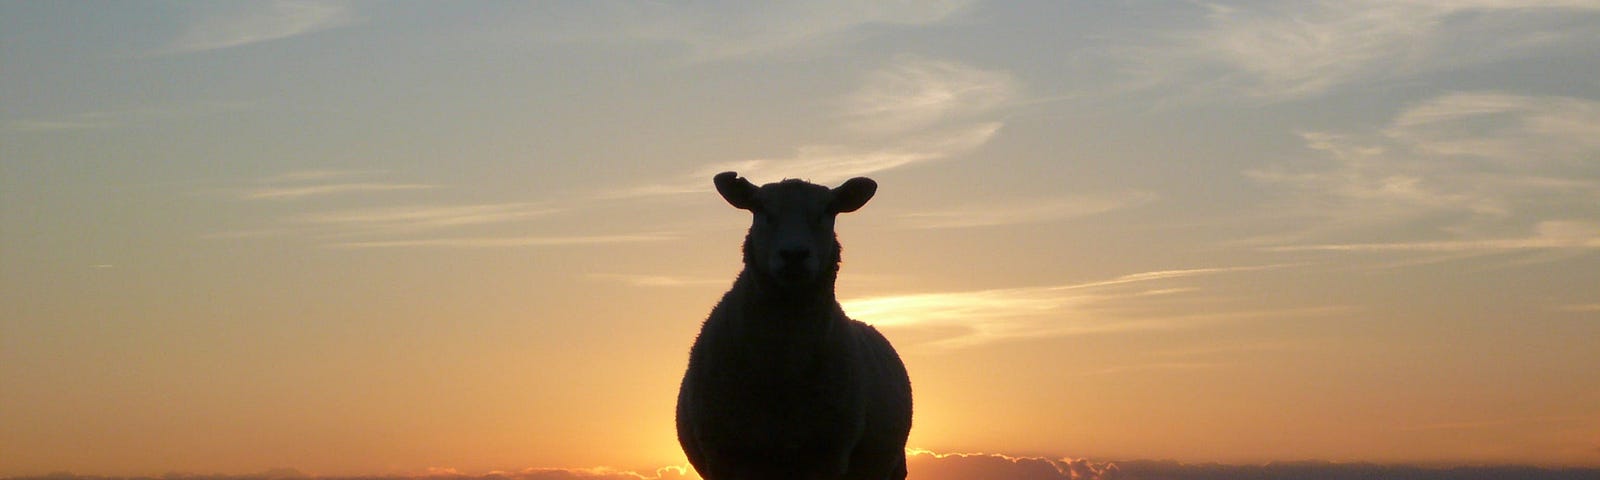 A sheep in sillhouette against the sunset